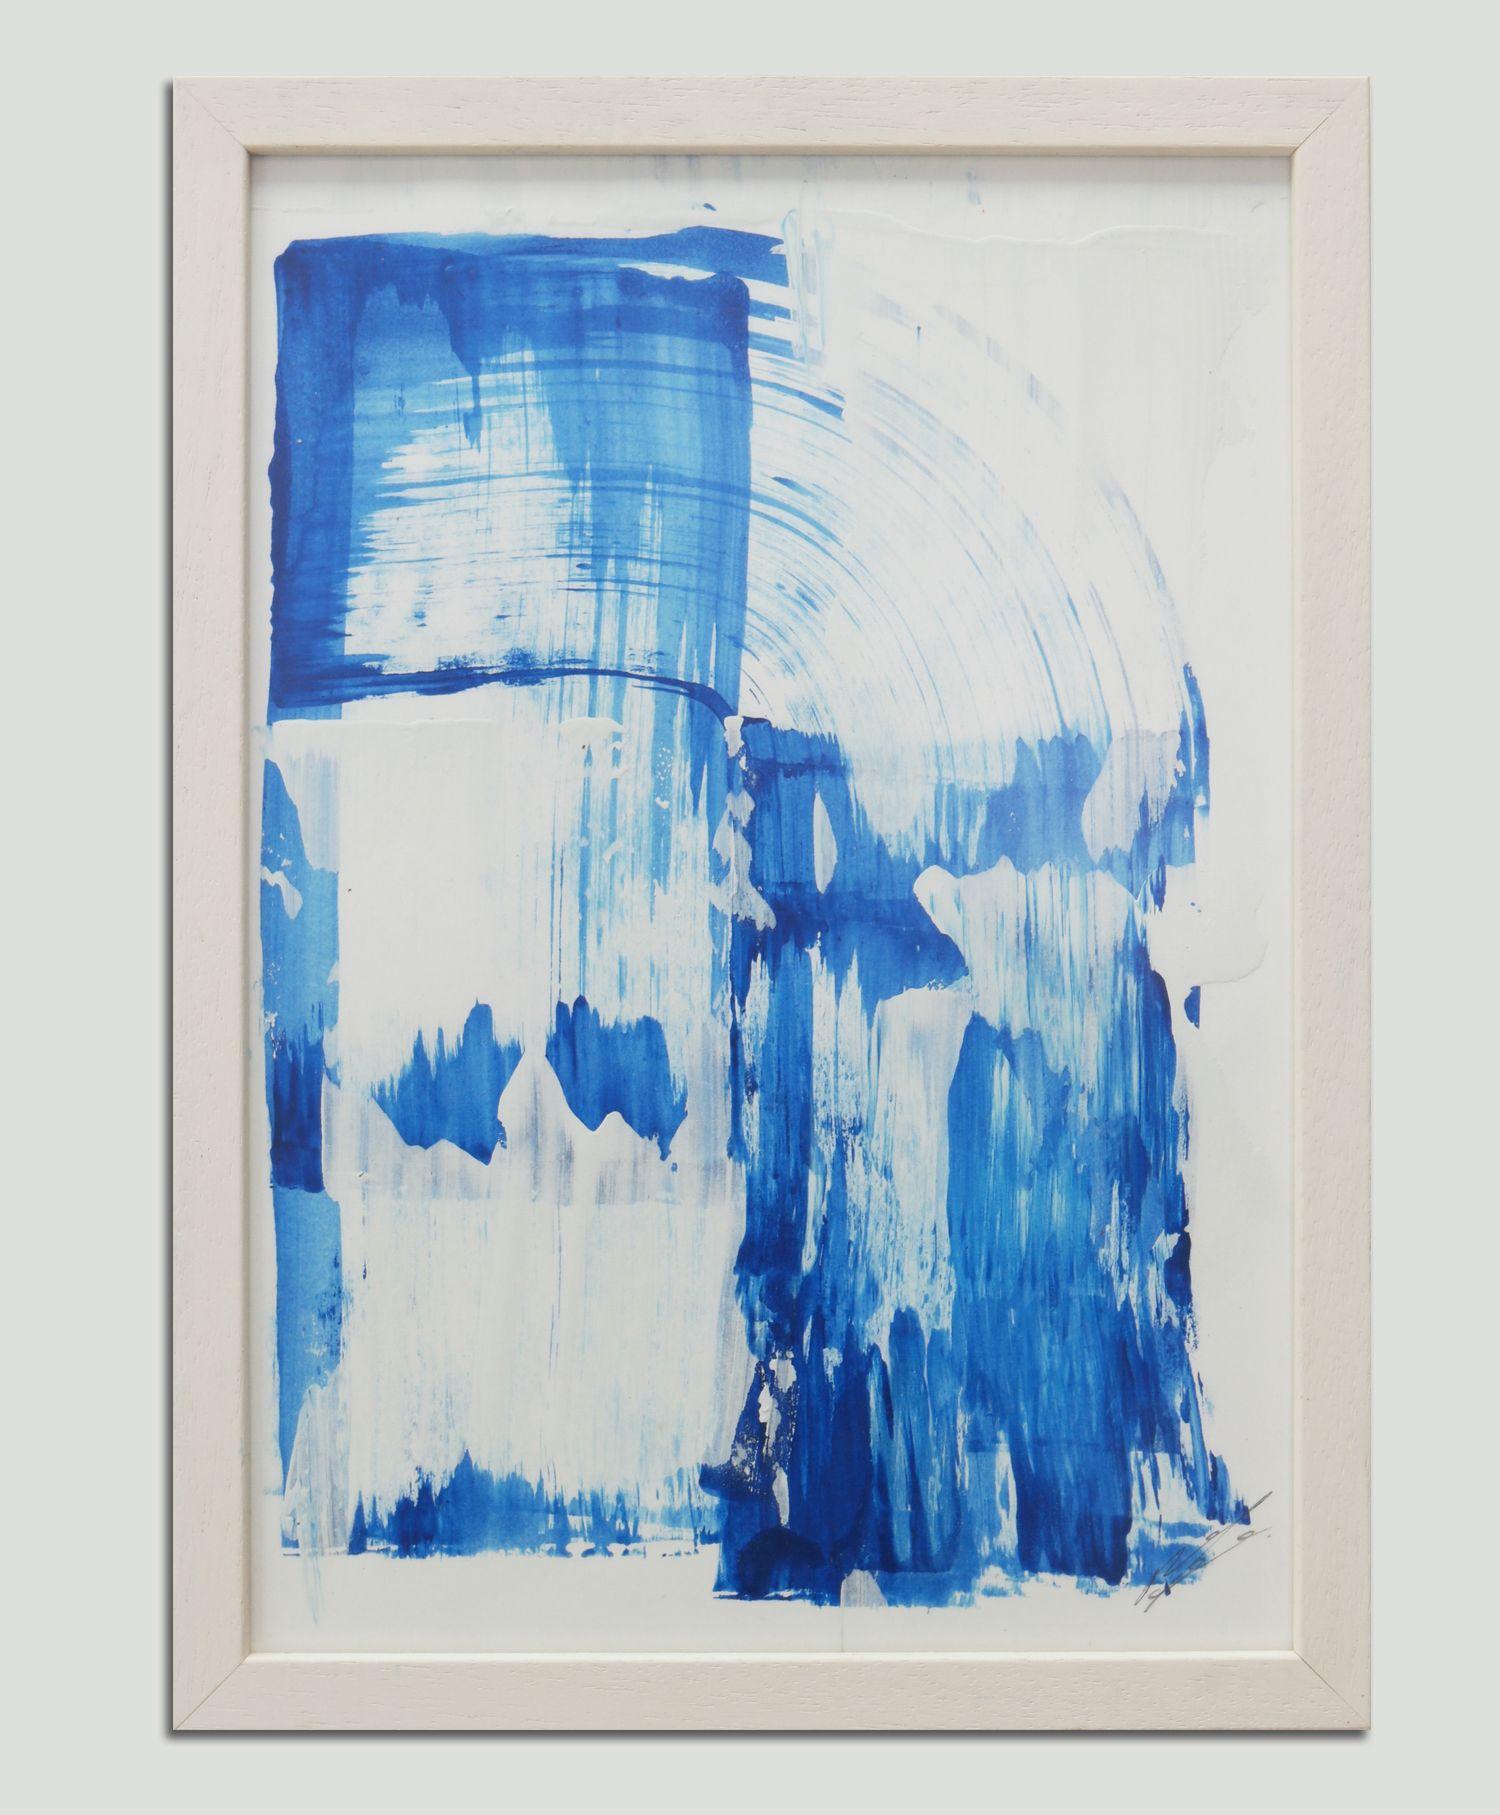 Dreamwave Blue - Diptych - Incl Frame, Painting, Acrylic on Paper 1